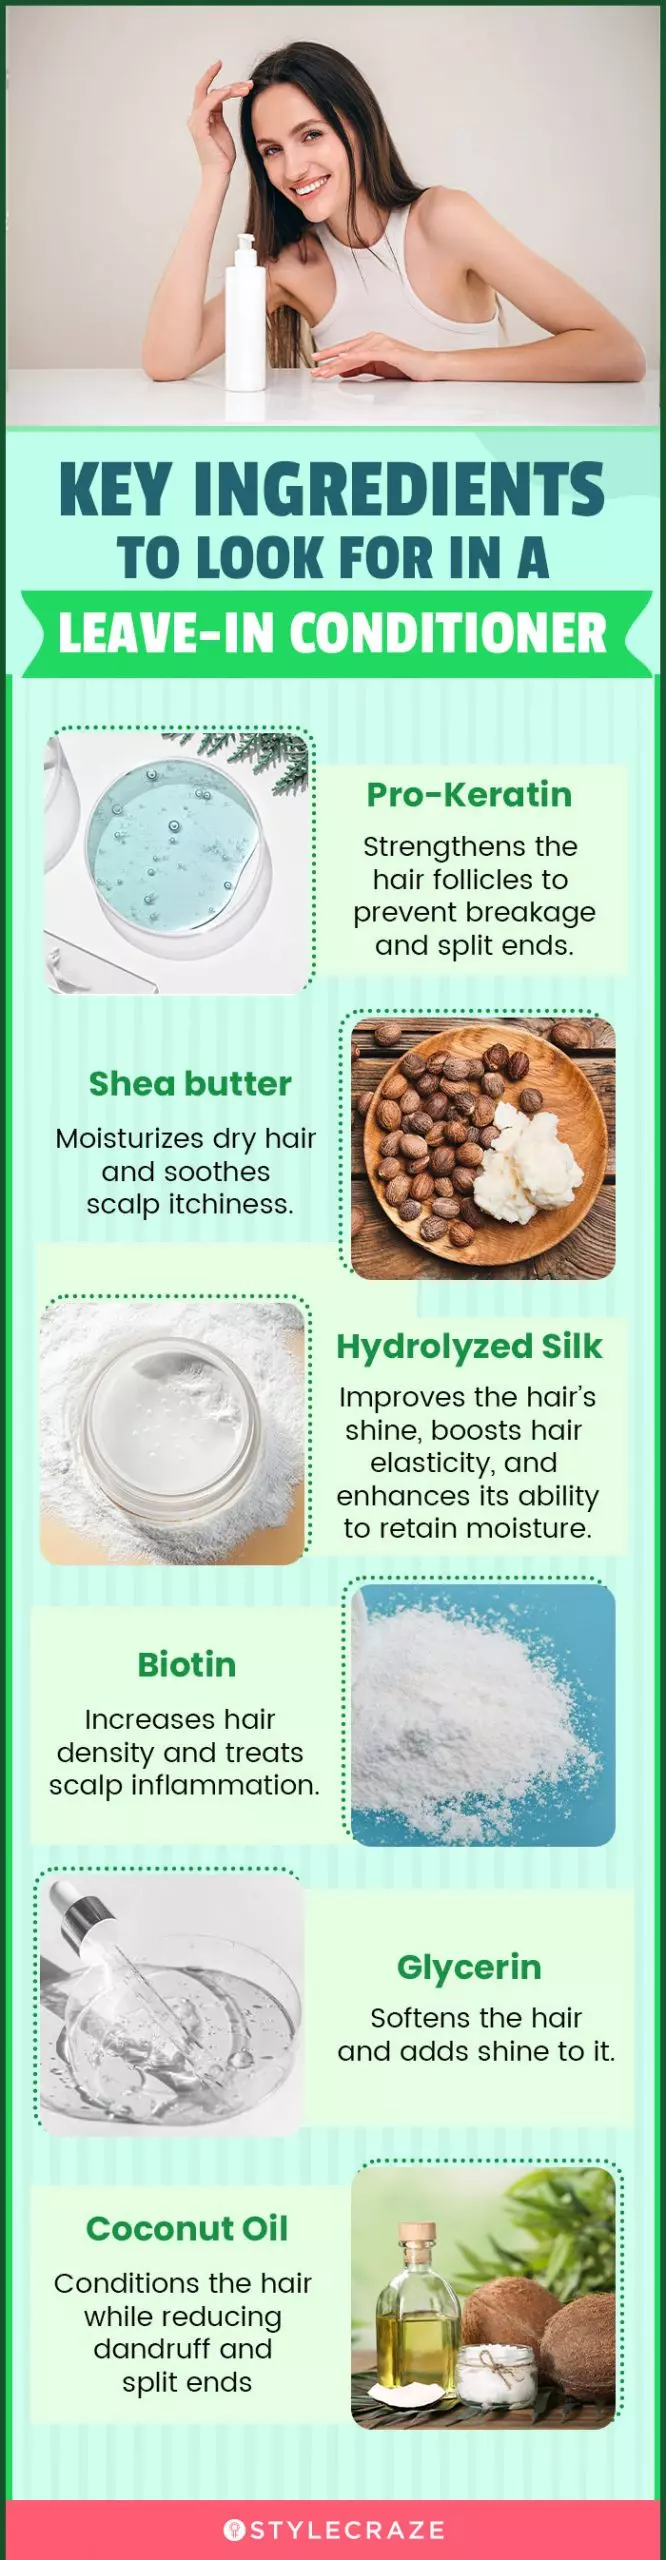 Key Ingredients To Look For In A Leave-In Conditioner (infographic)